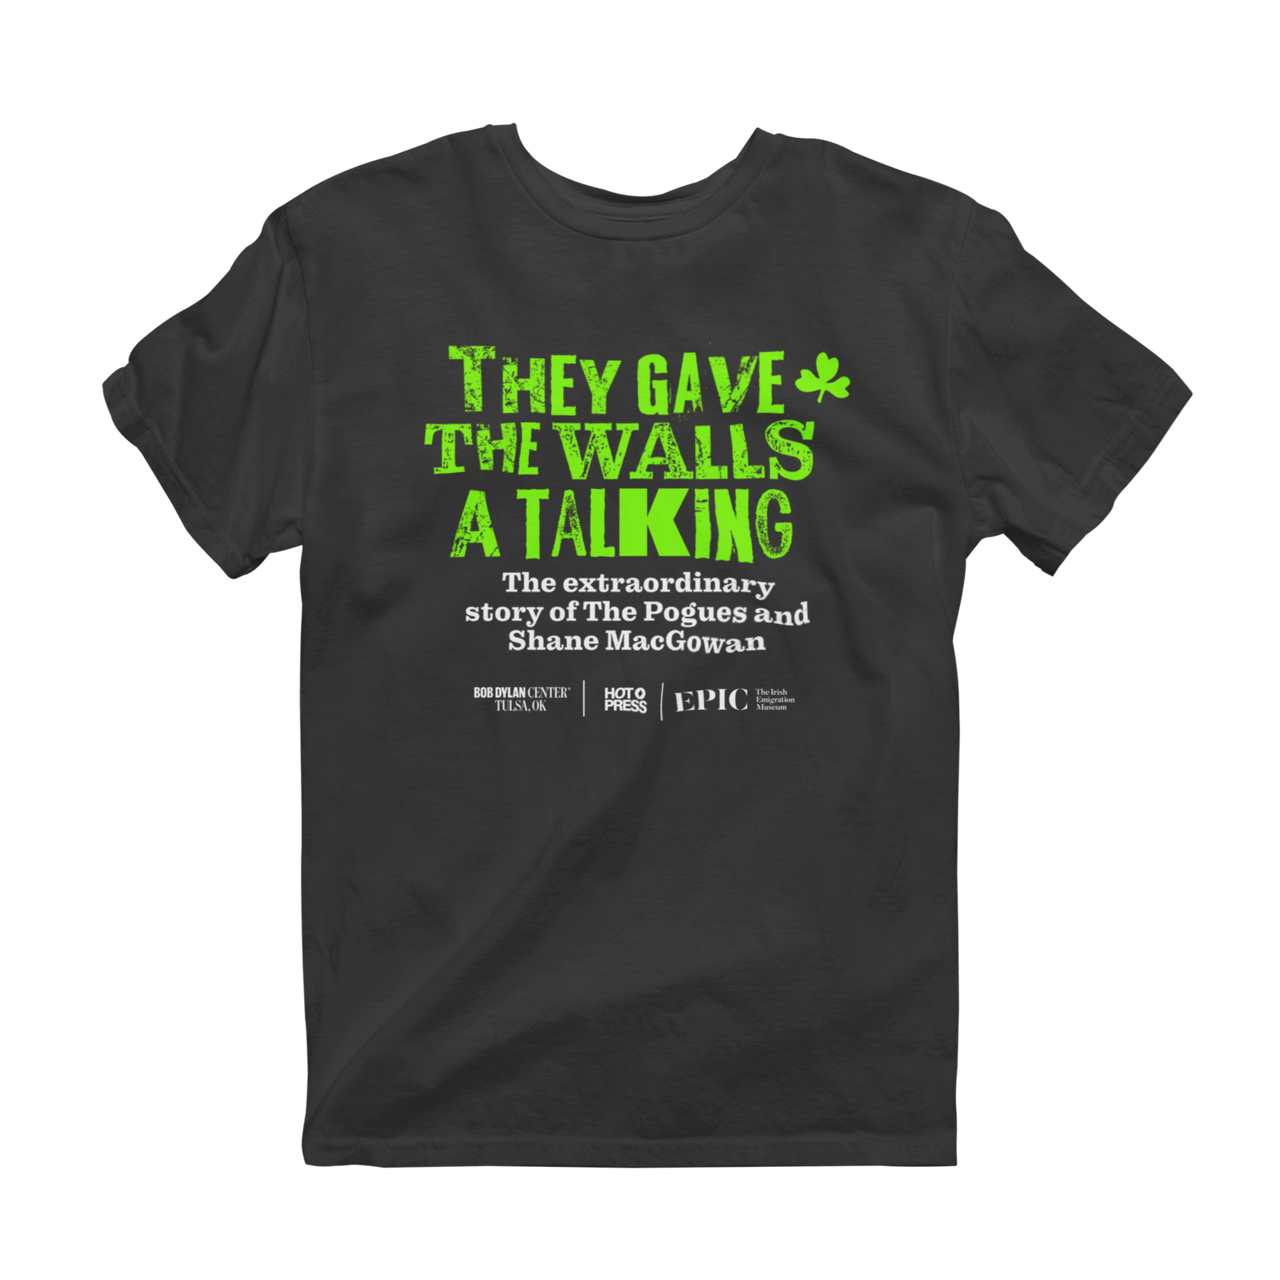 They Gave The Walls A Talking Exhibit Shirt